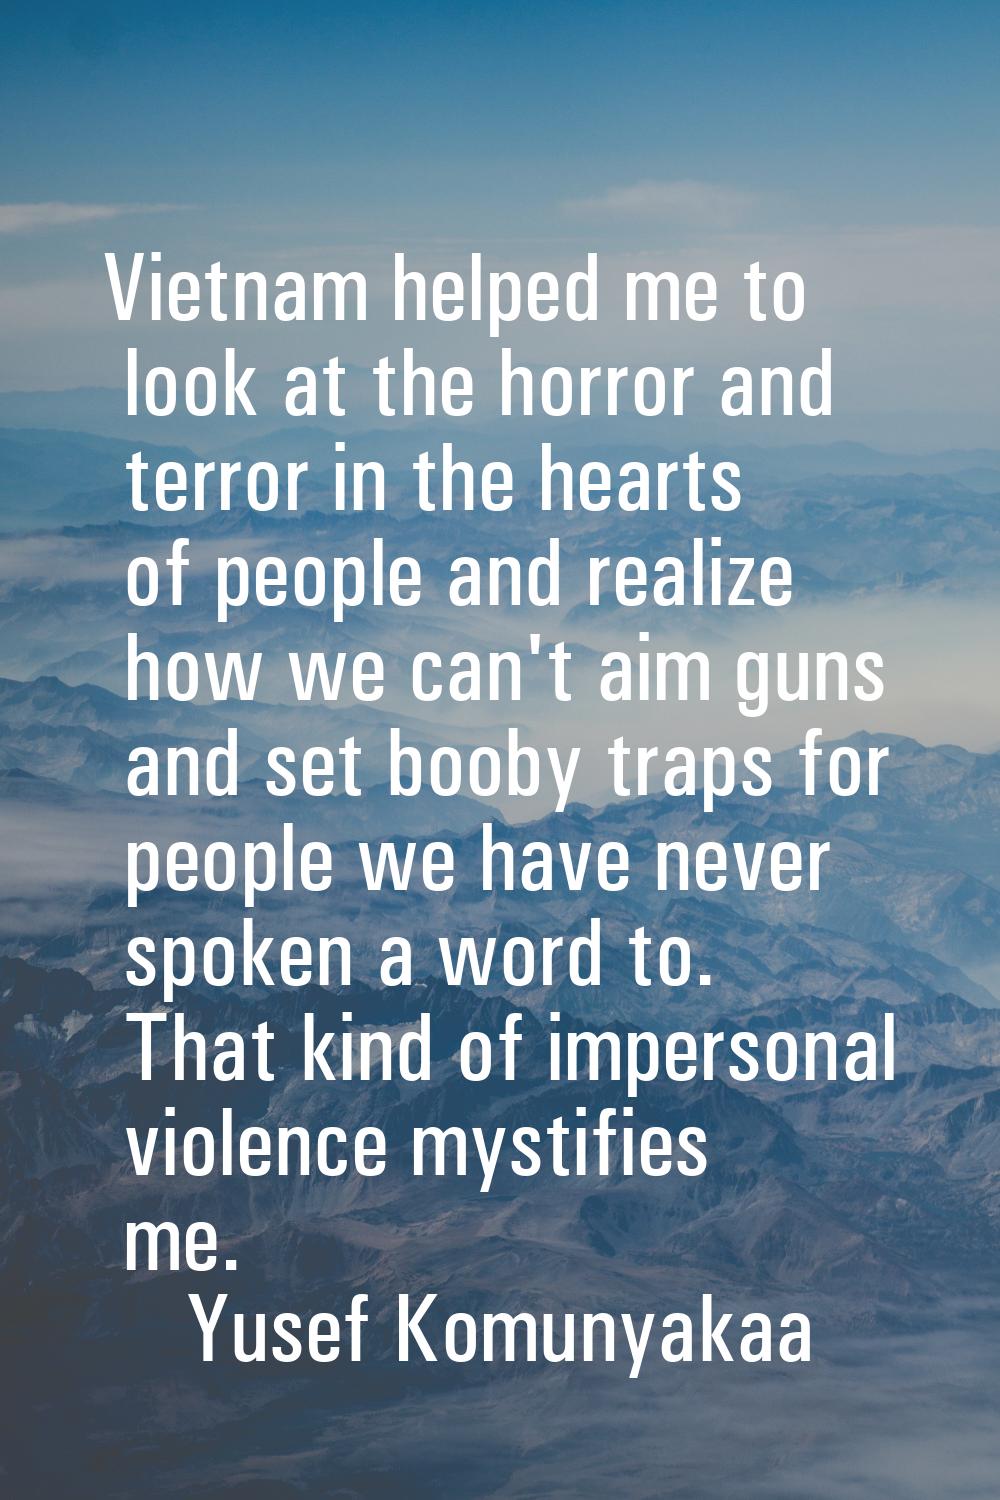 Vietnam helped me to look at the horror and terror in the hearts of people and realize how we can't